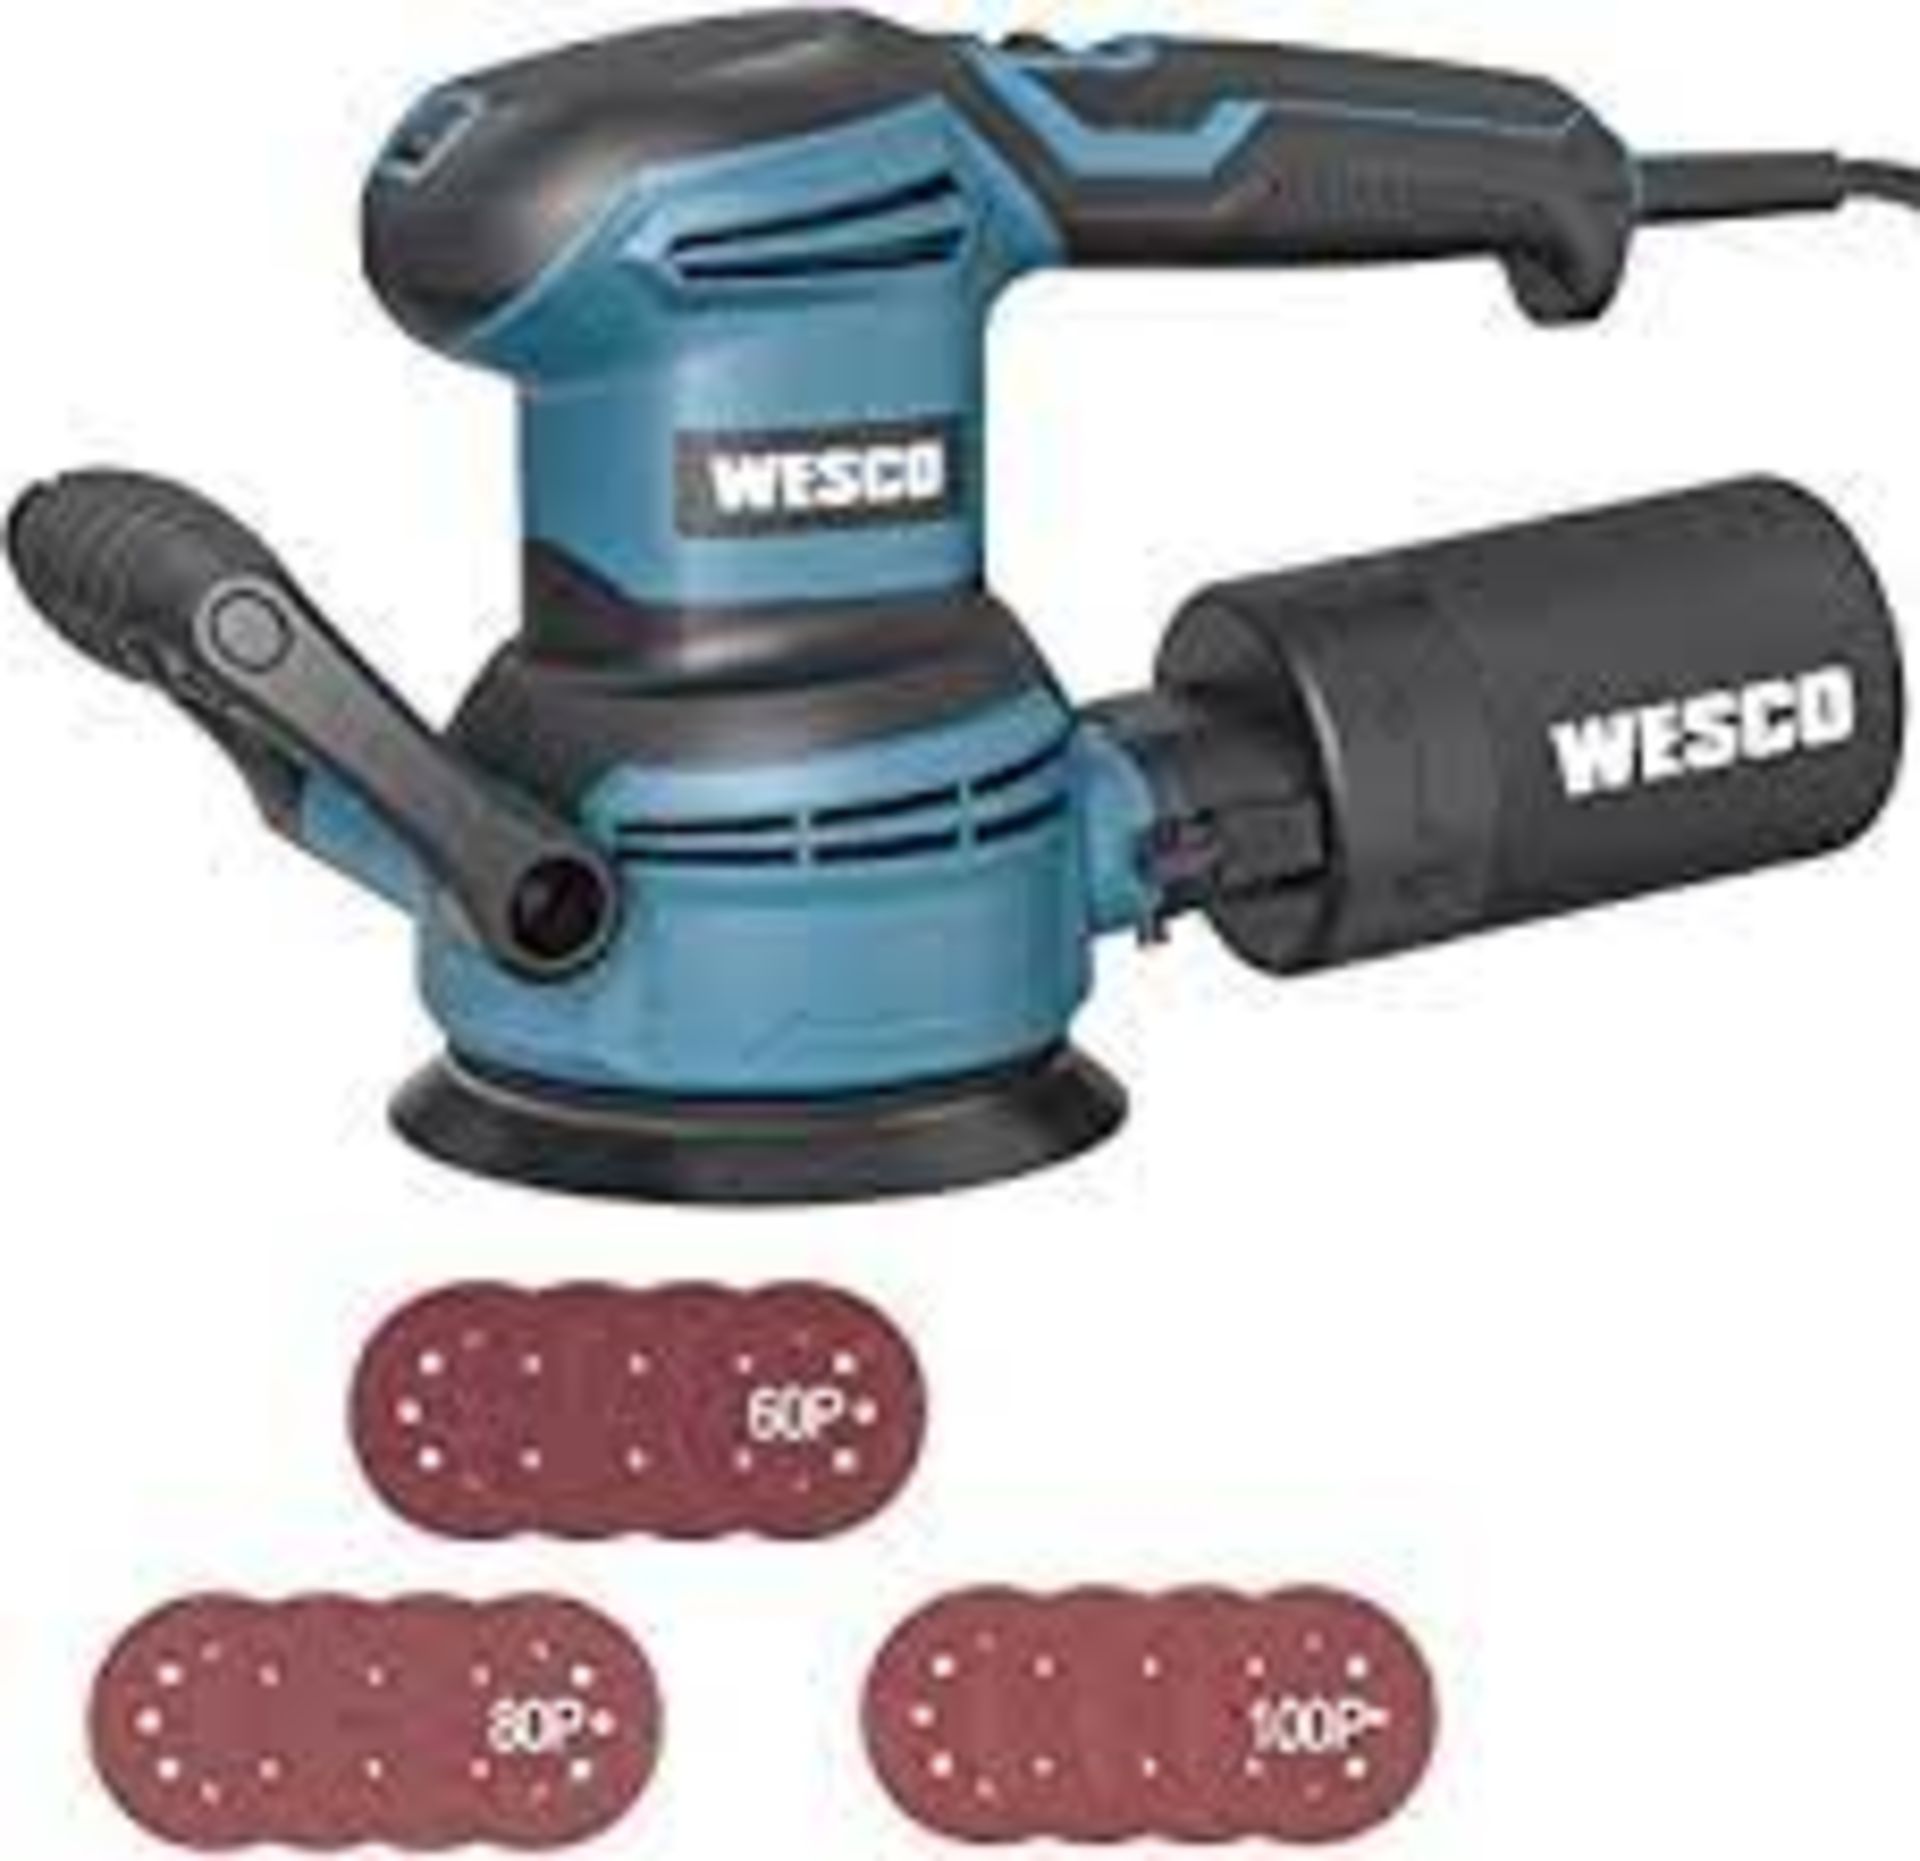 2 X NEW BOXED WESCO 400W 12000RPM 125mm Random Orbital Sander with 12Pcs Sandpapers, 6 Variable